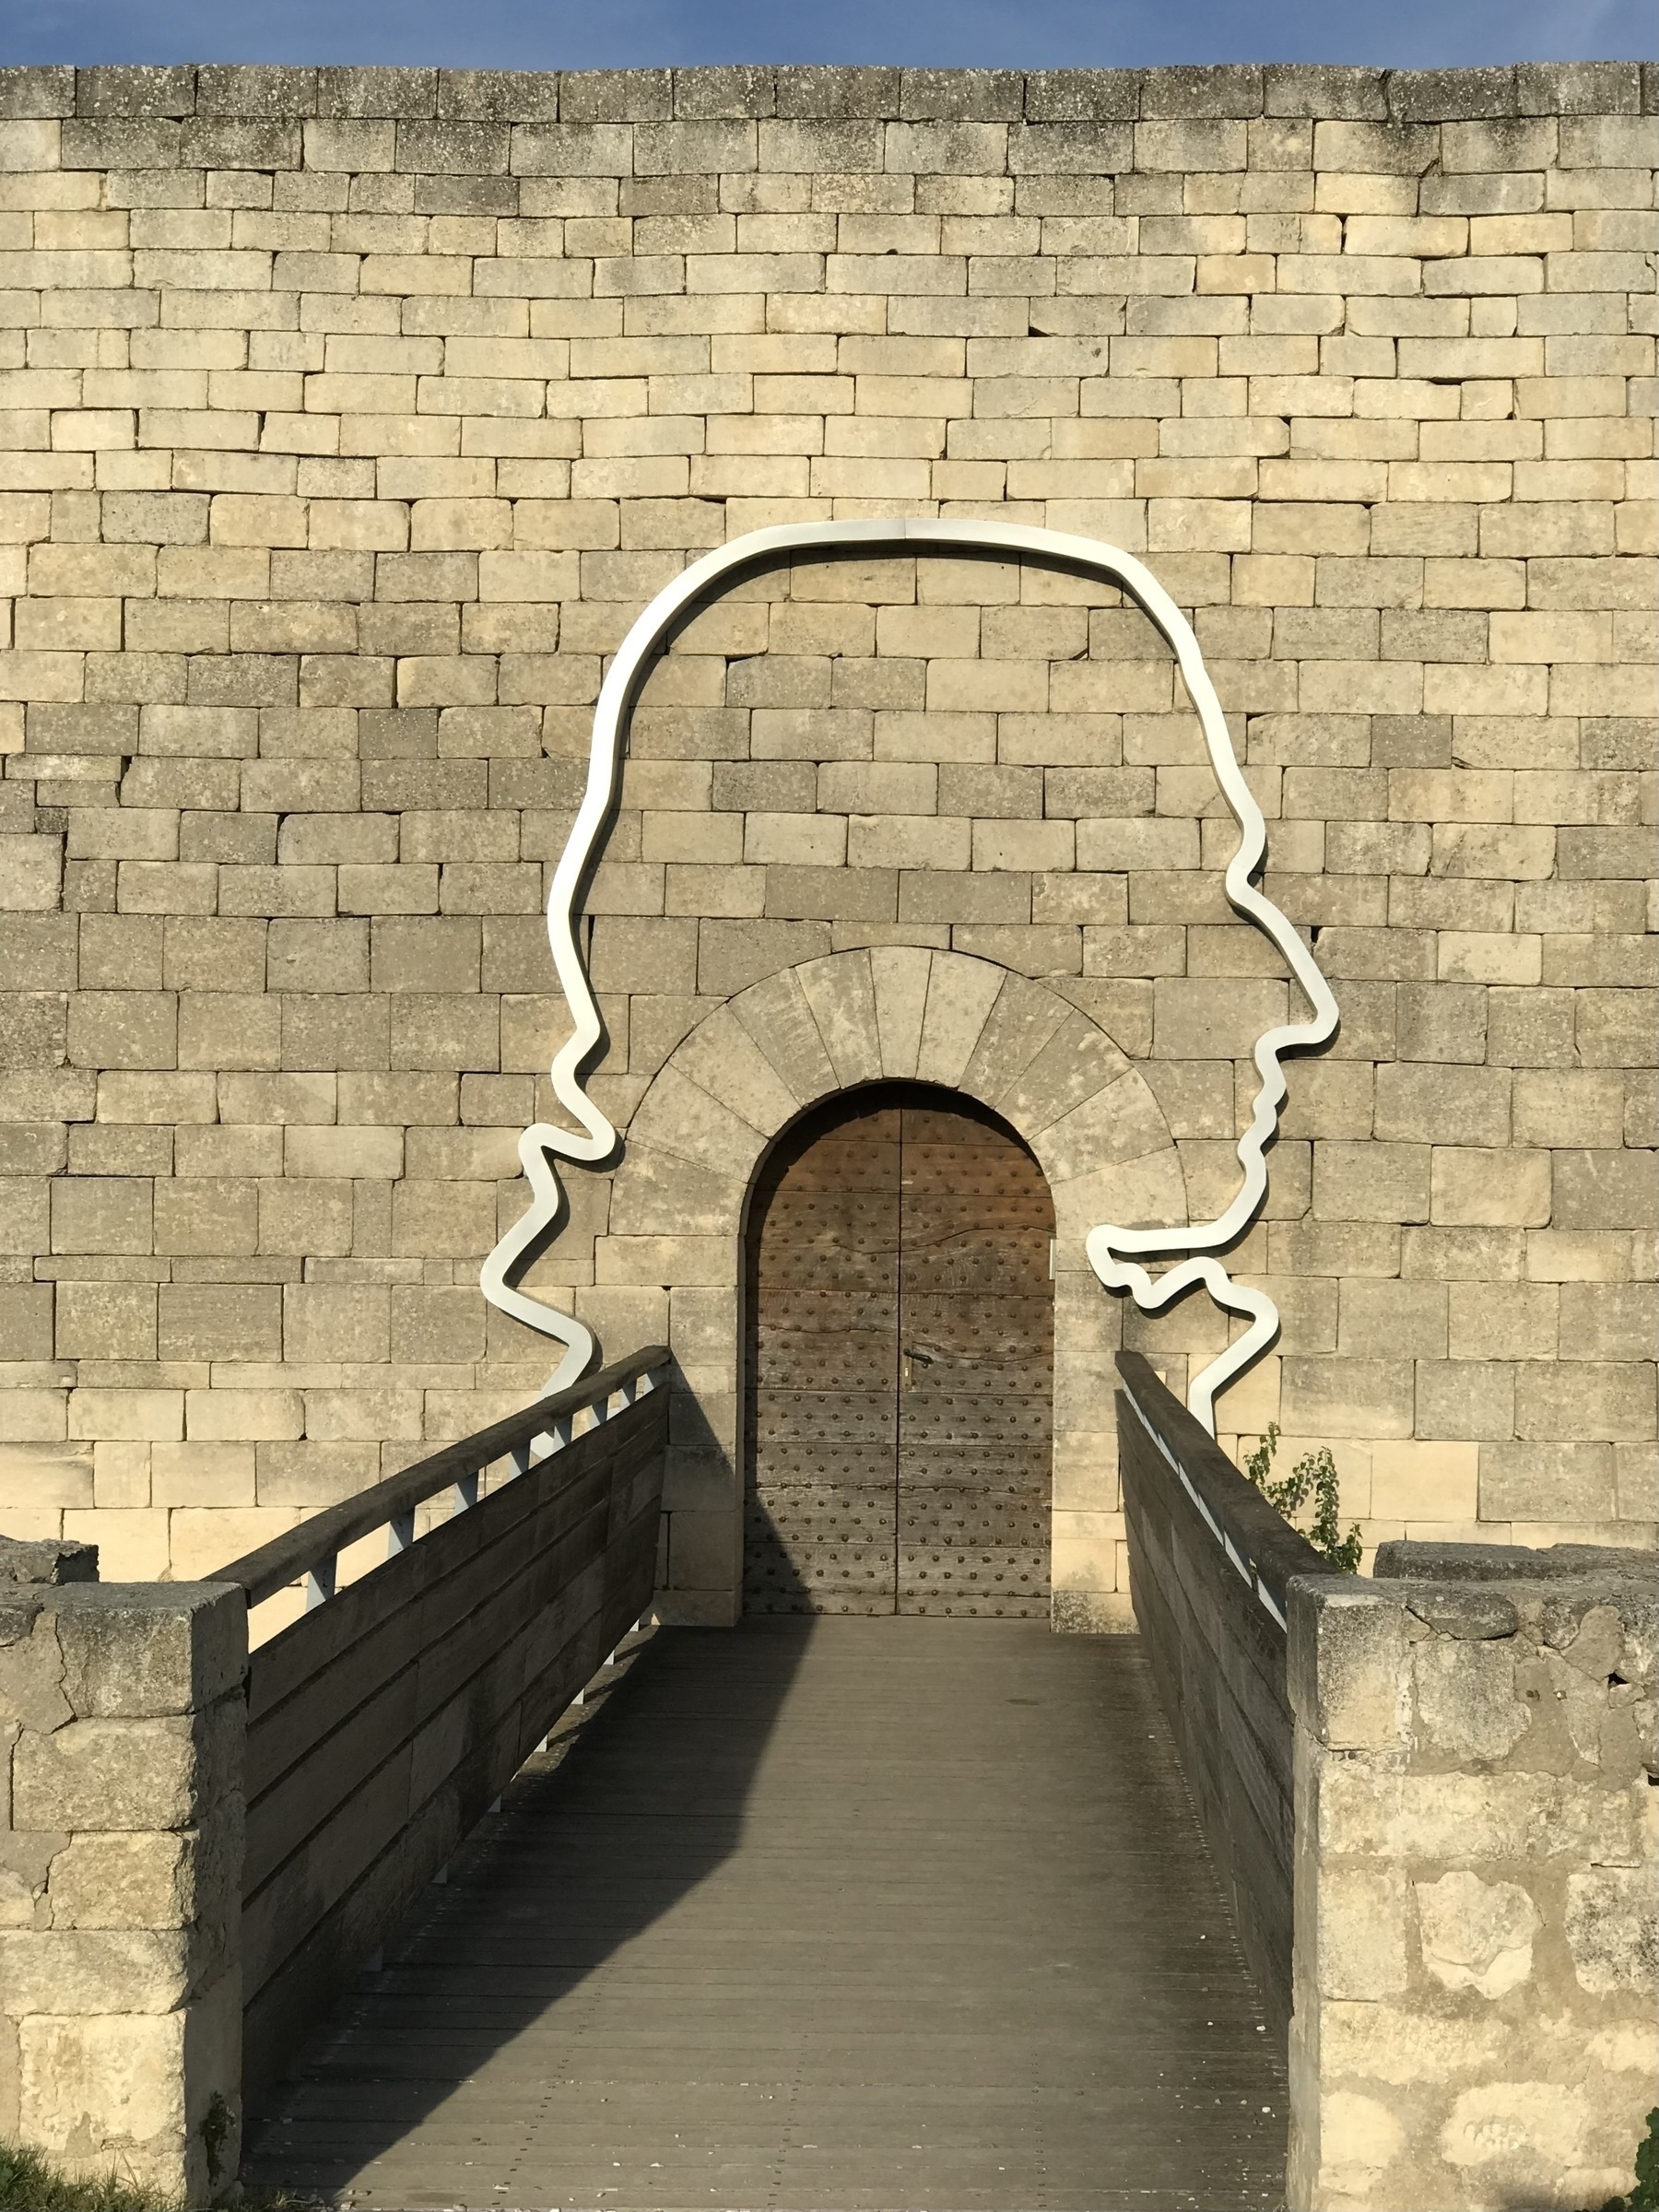 The outline of a person maybe Shakespeare, on a wall surrounding a door, approached by a wooden bridge.